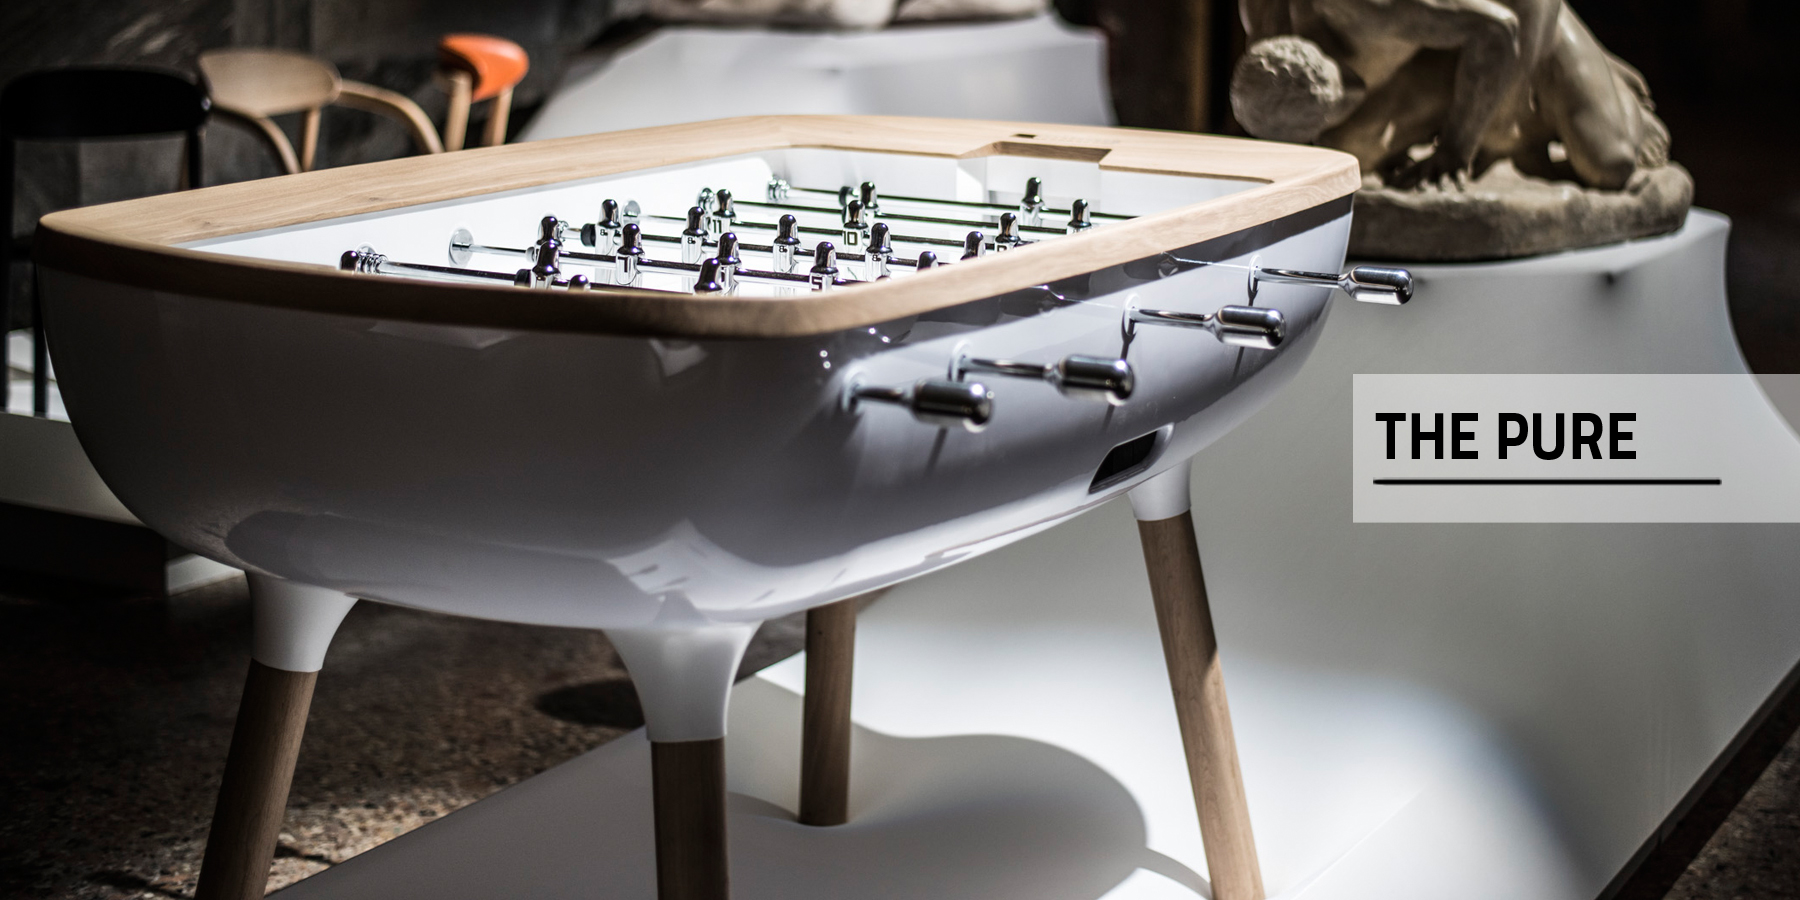 Design foosball table The Pure - Alain Gilles - Babyfoot By Toulet